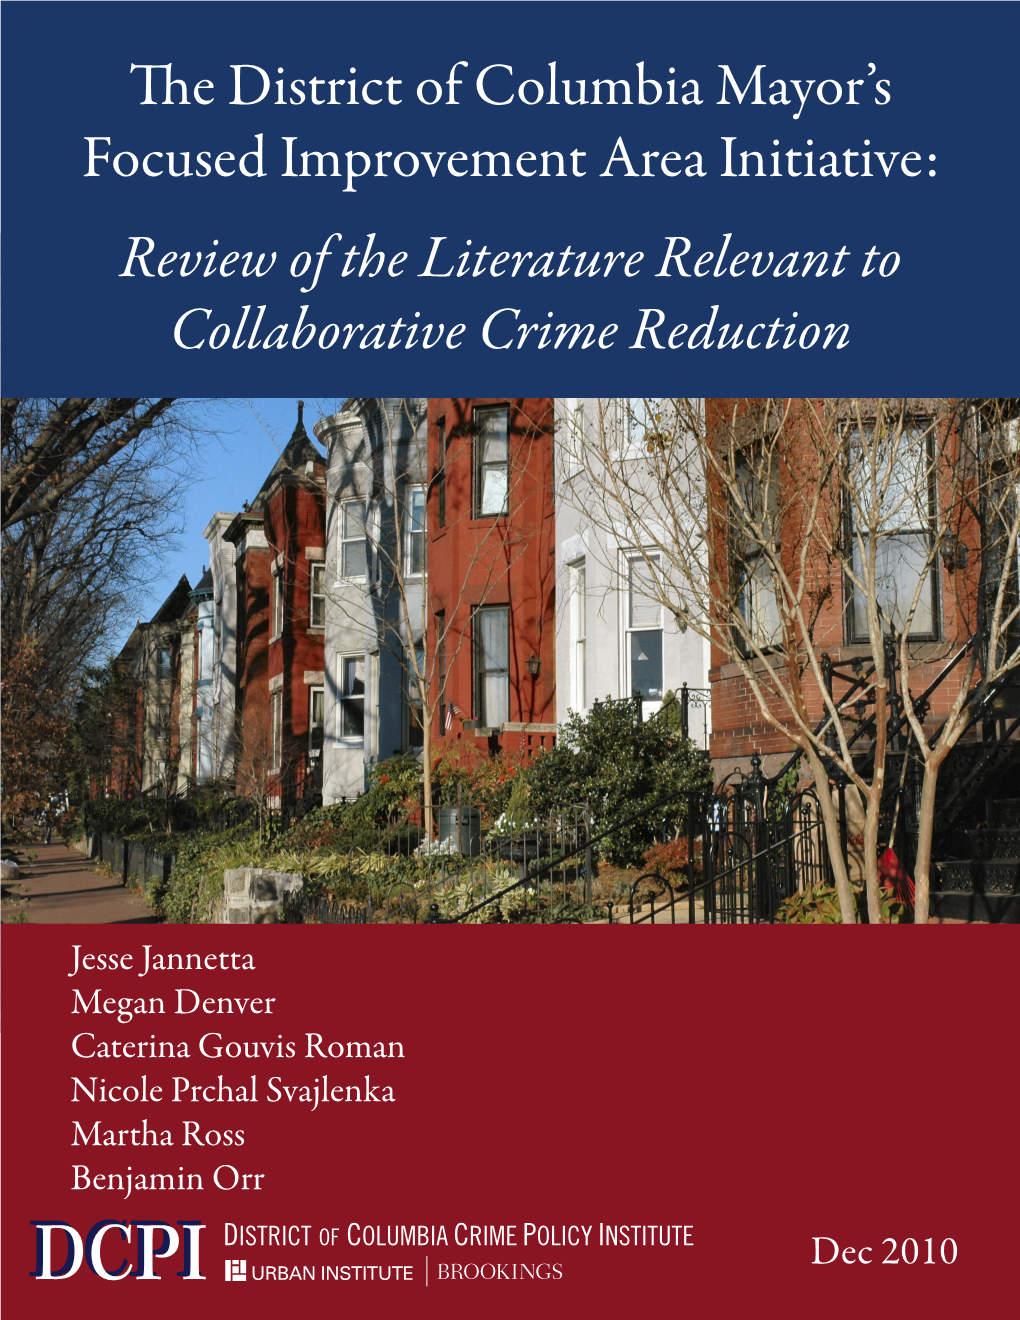 The District of Columbia Mayor's Focused Improvement Area Initiative: Review of the Literature Relevant to Collaborative